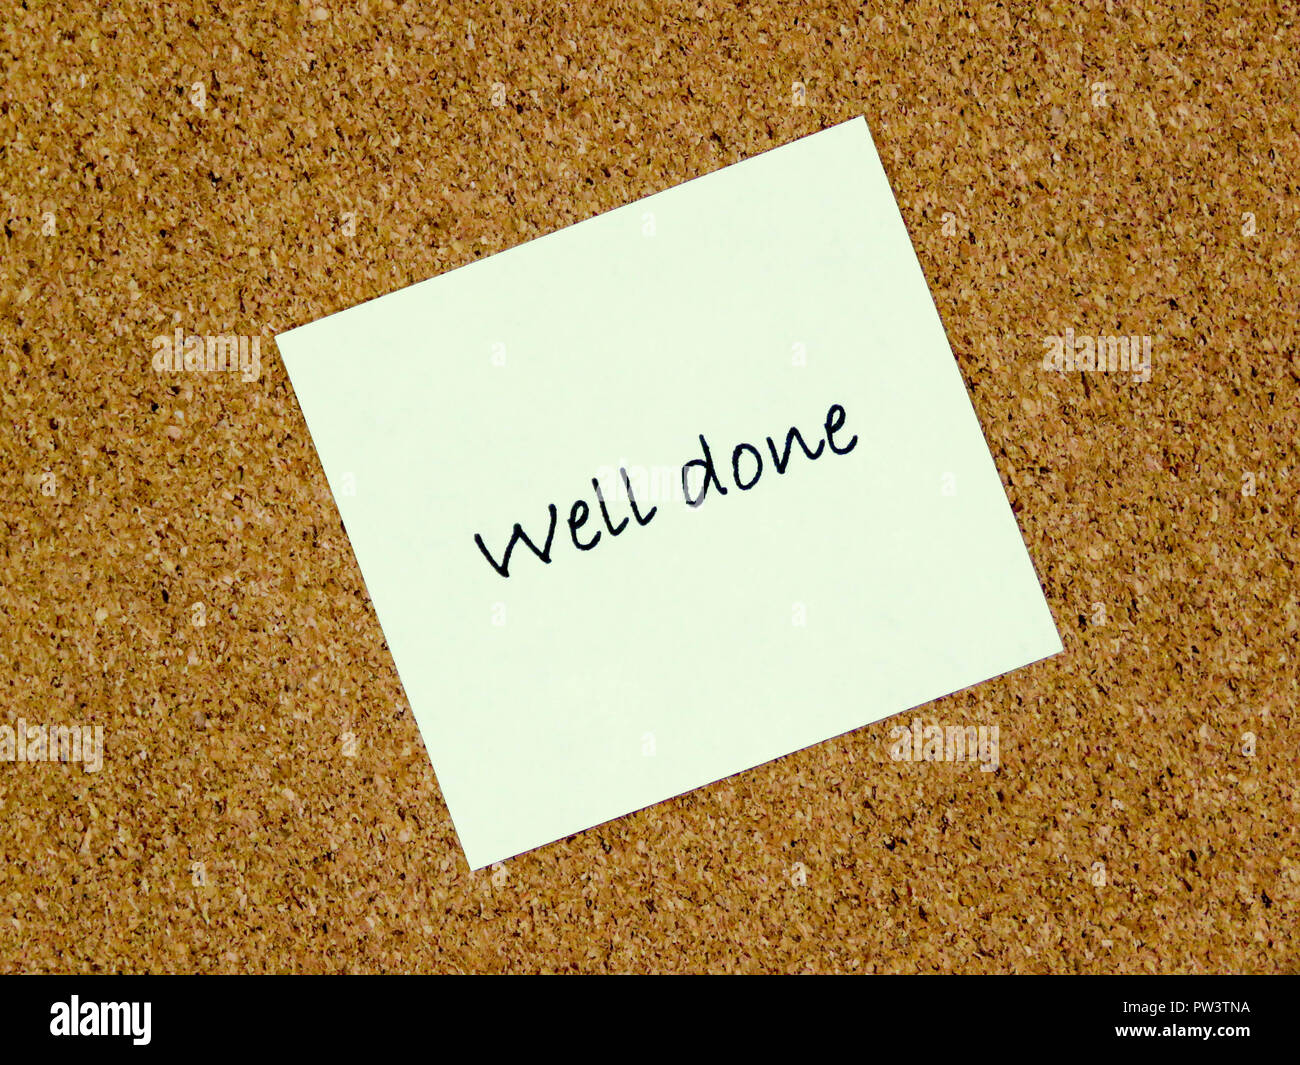 A yellow sticky note with well done written on it on a cork board background Stock Photo